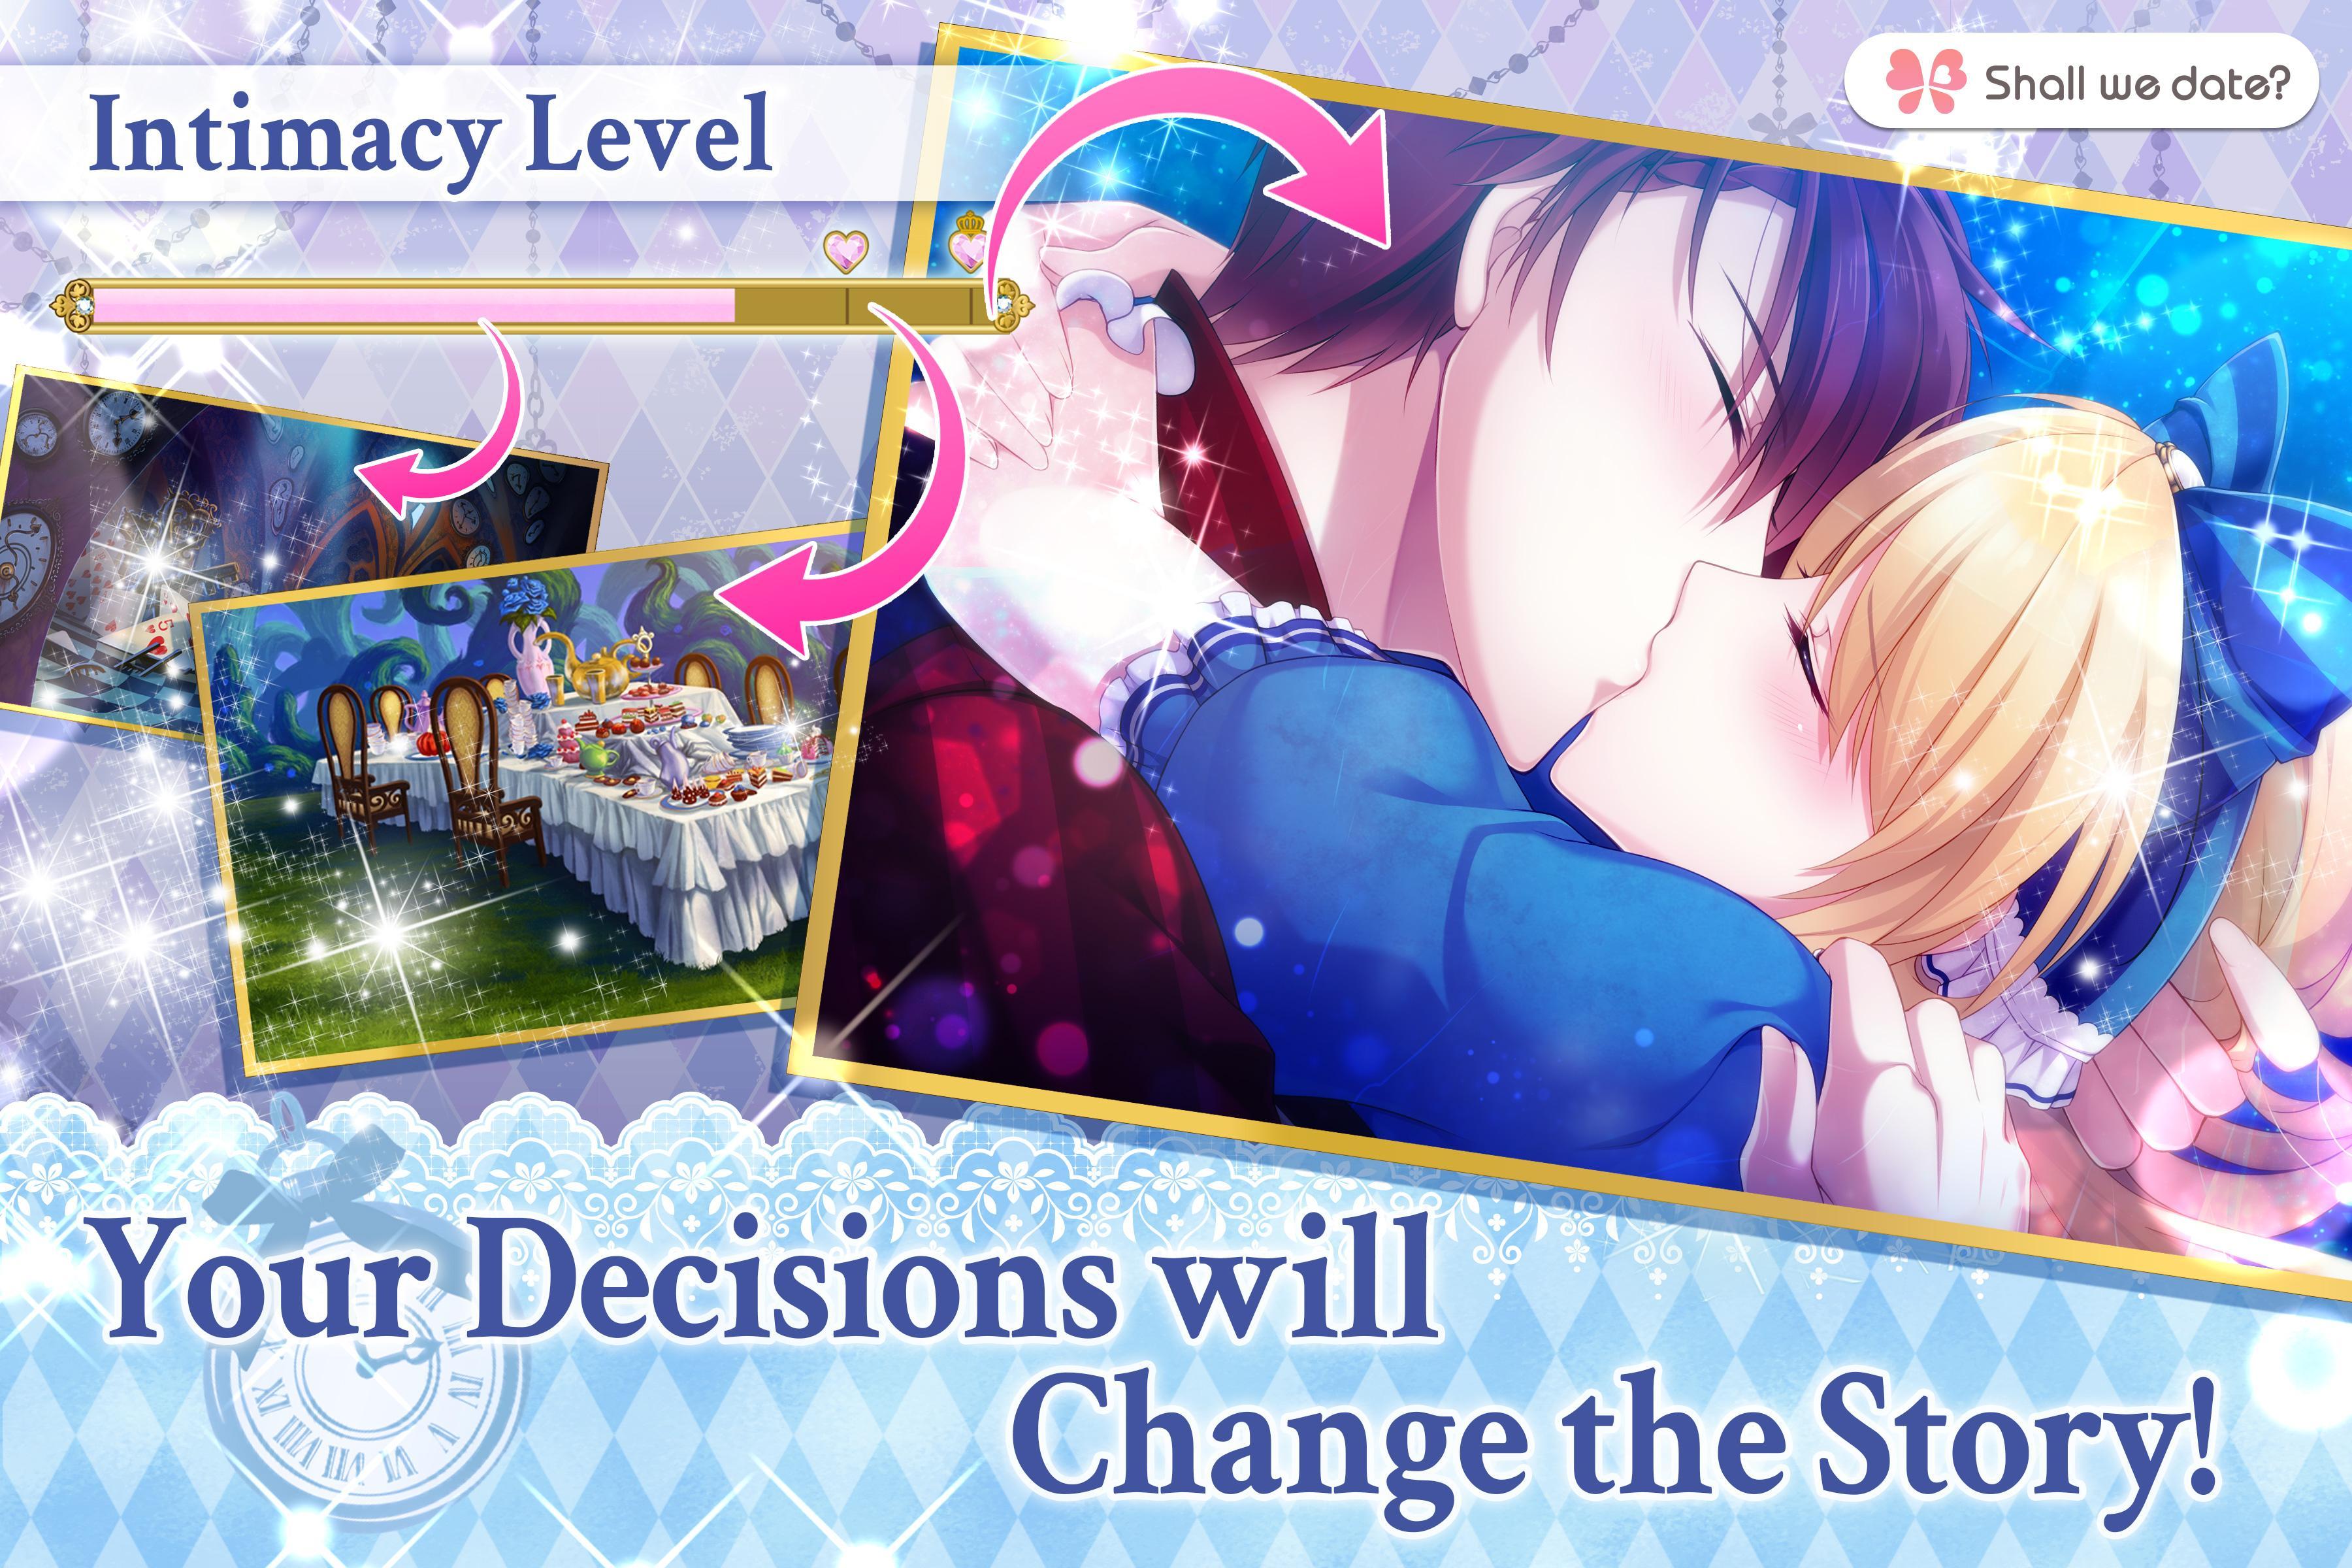 Lost Alice - otome game/dating sim #shall we date 1.5.1 Screenshot 12